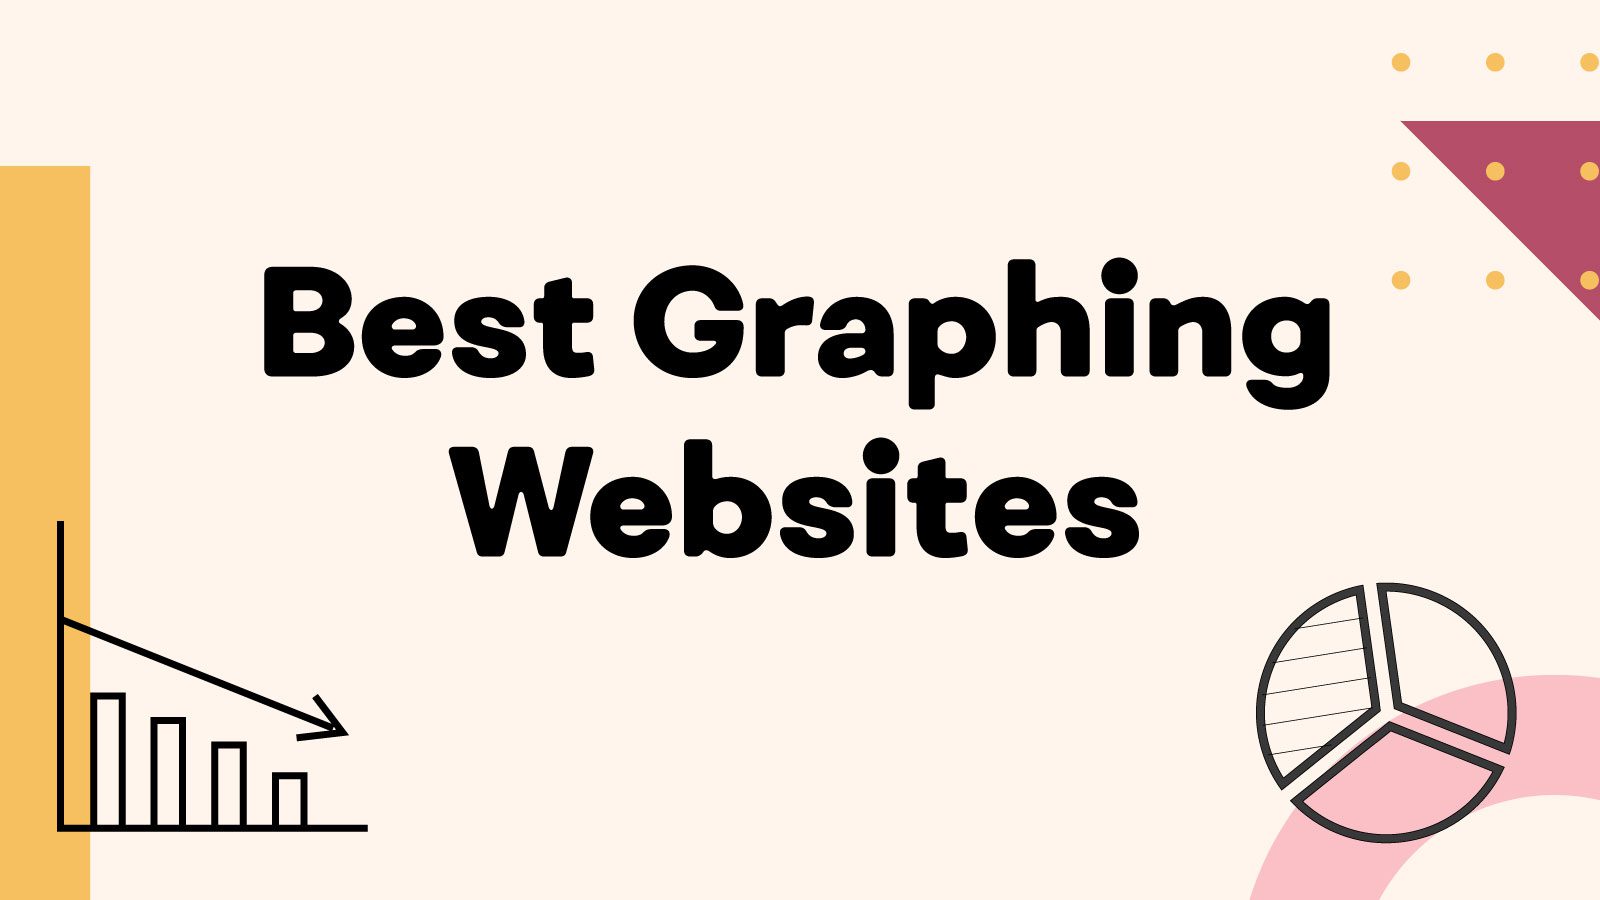 The best graphing websites.